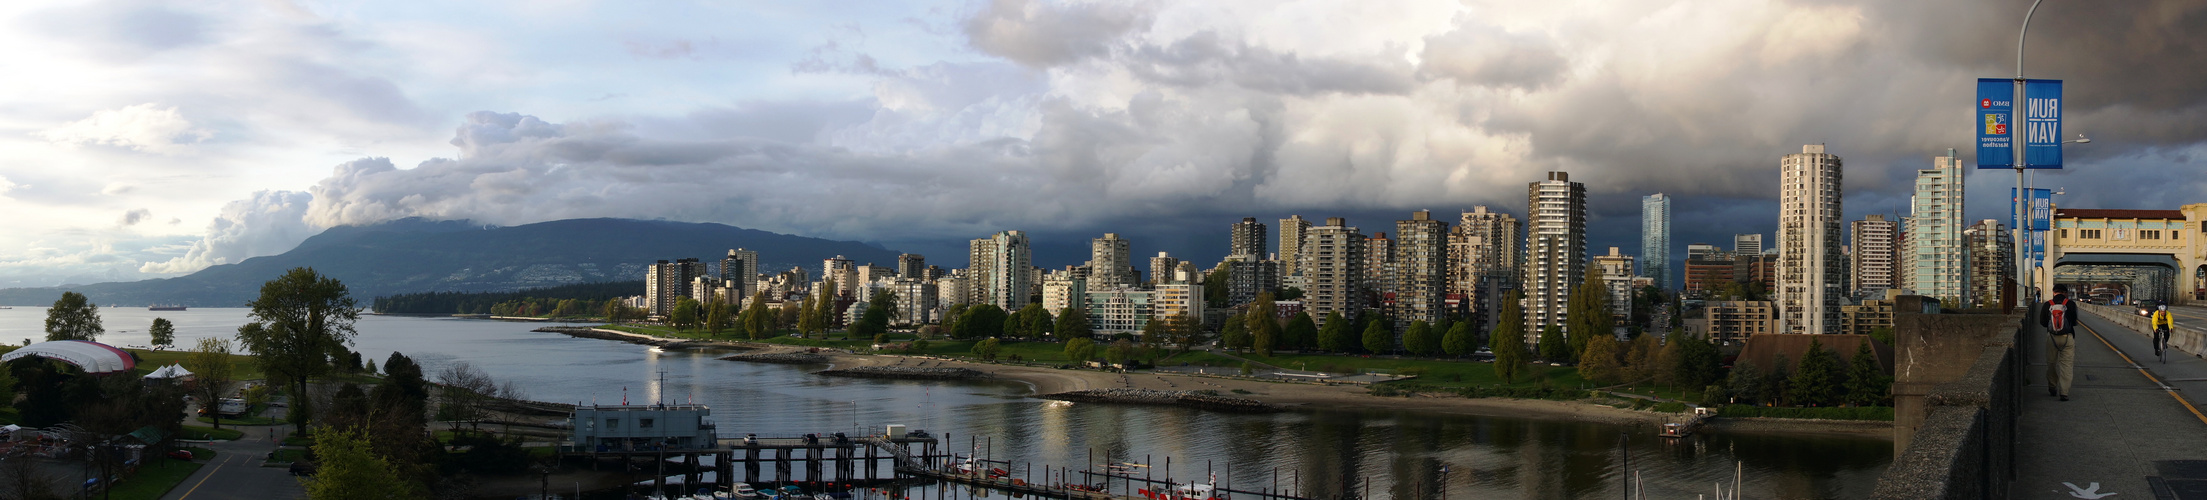 Clouds over Vancouver